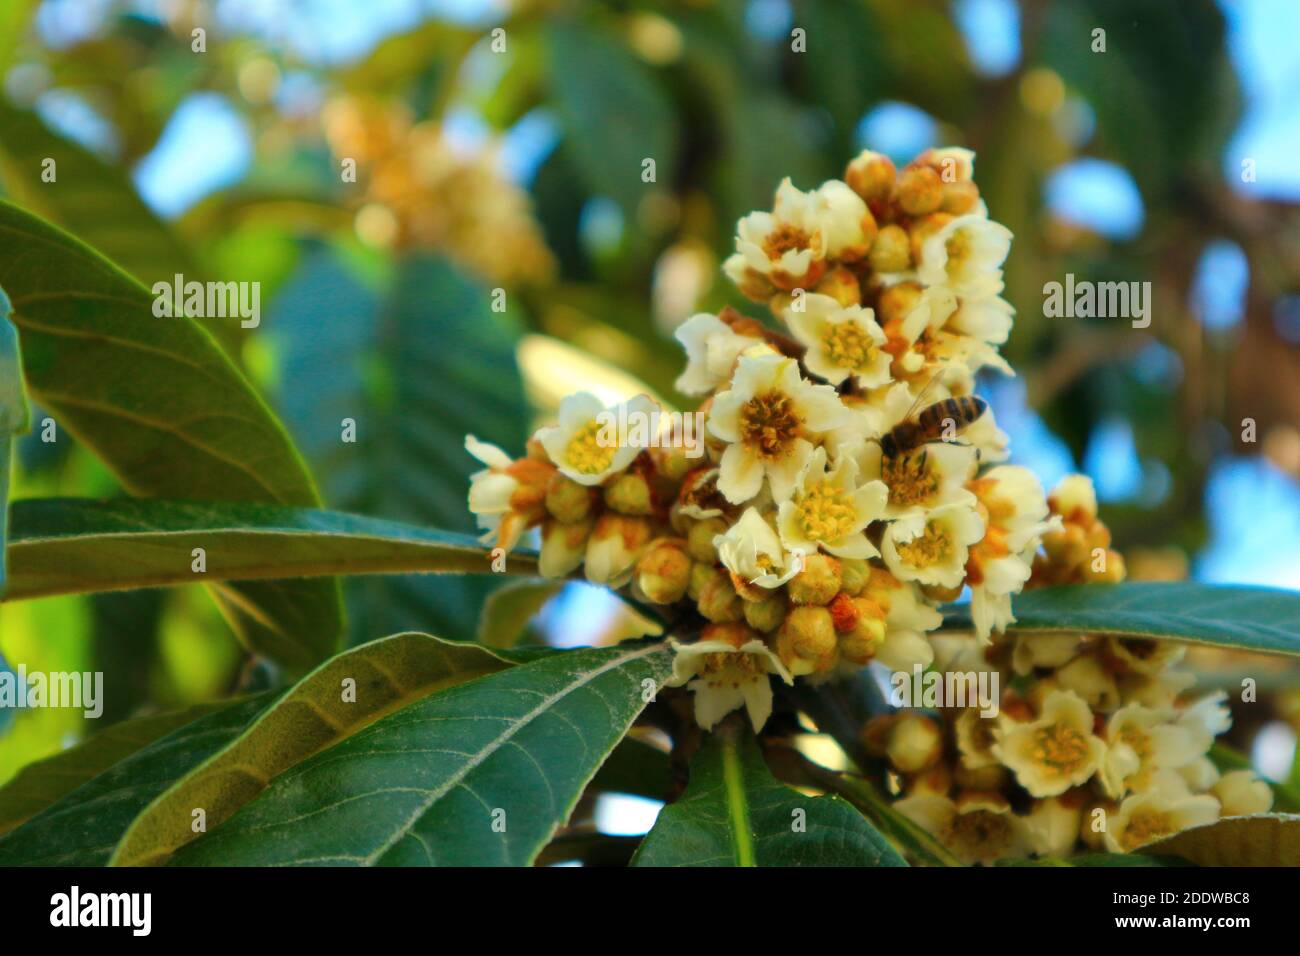 Eriobotrya japonica (Loquat) tree autumn blooming. Fruit tree flowers pollinated by bee close up. Stock Photo